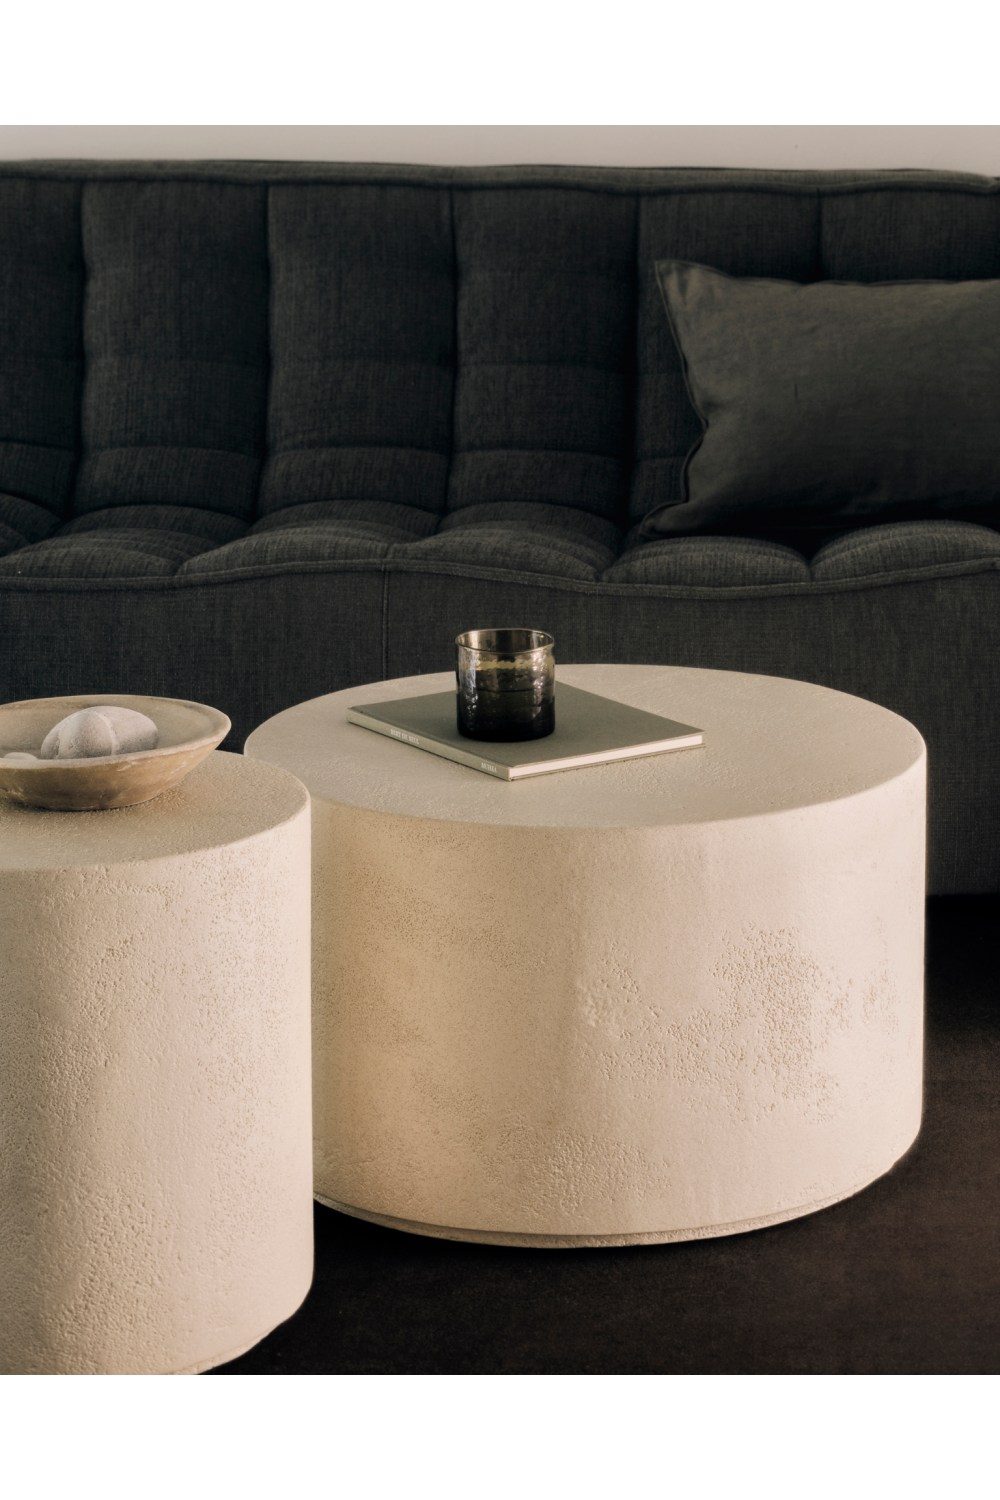 Off-White Side Table | Ethnicraft Elements | Oroa.com